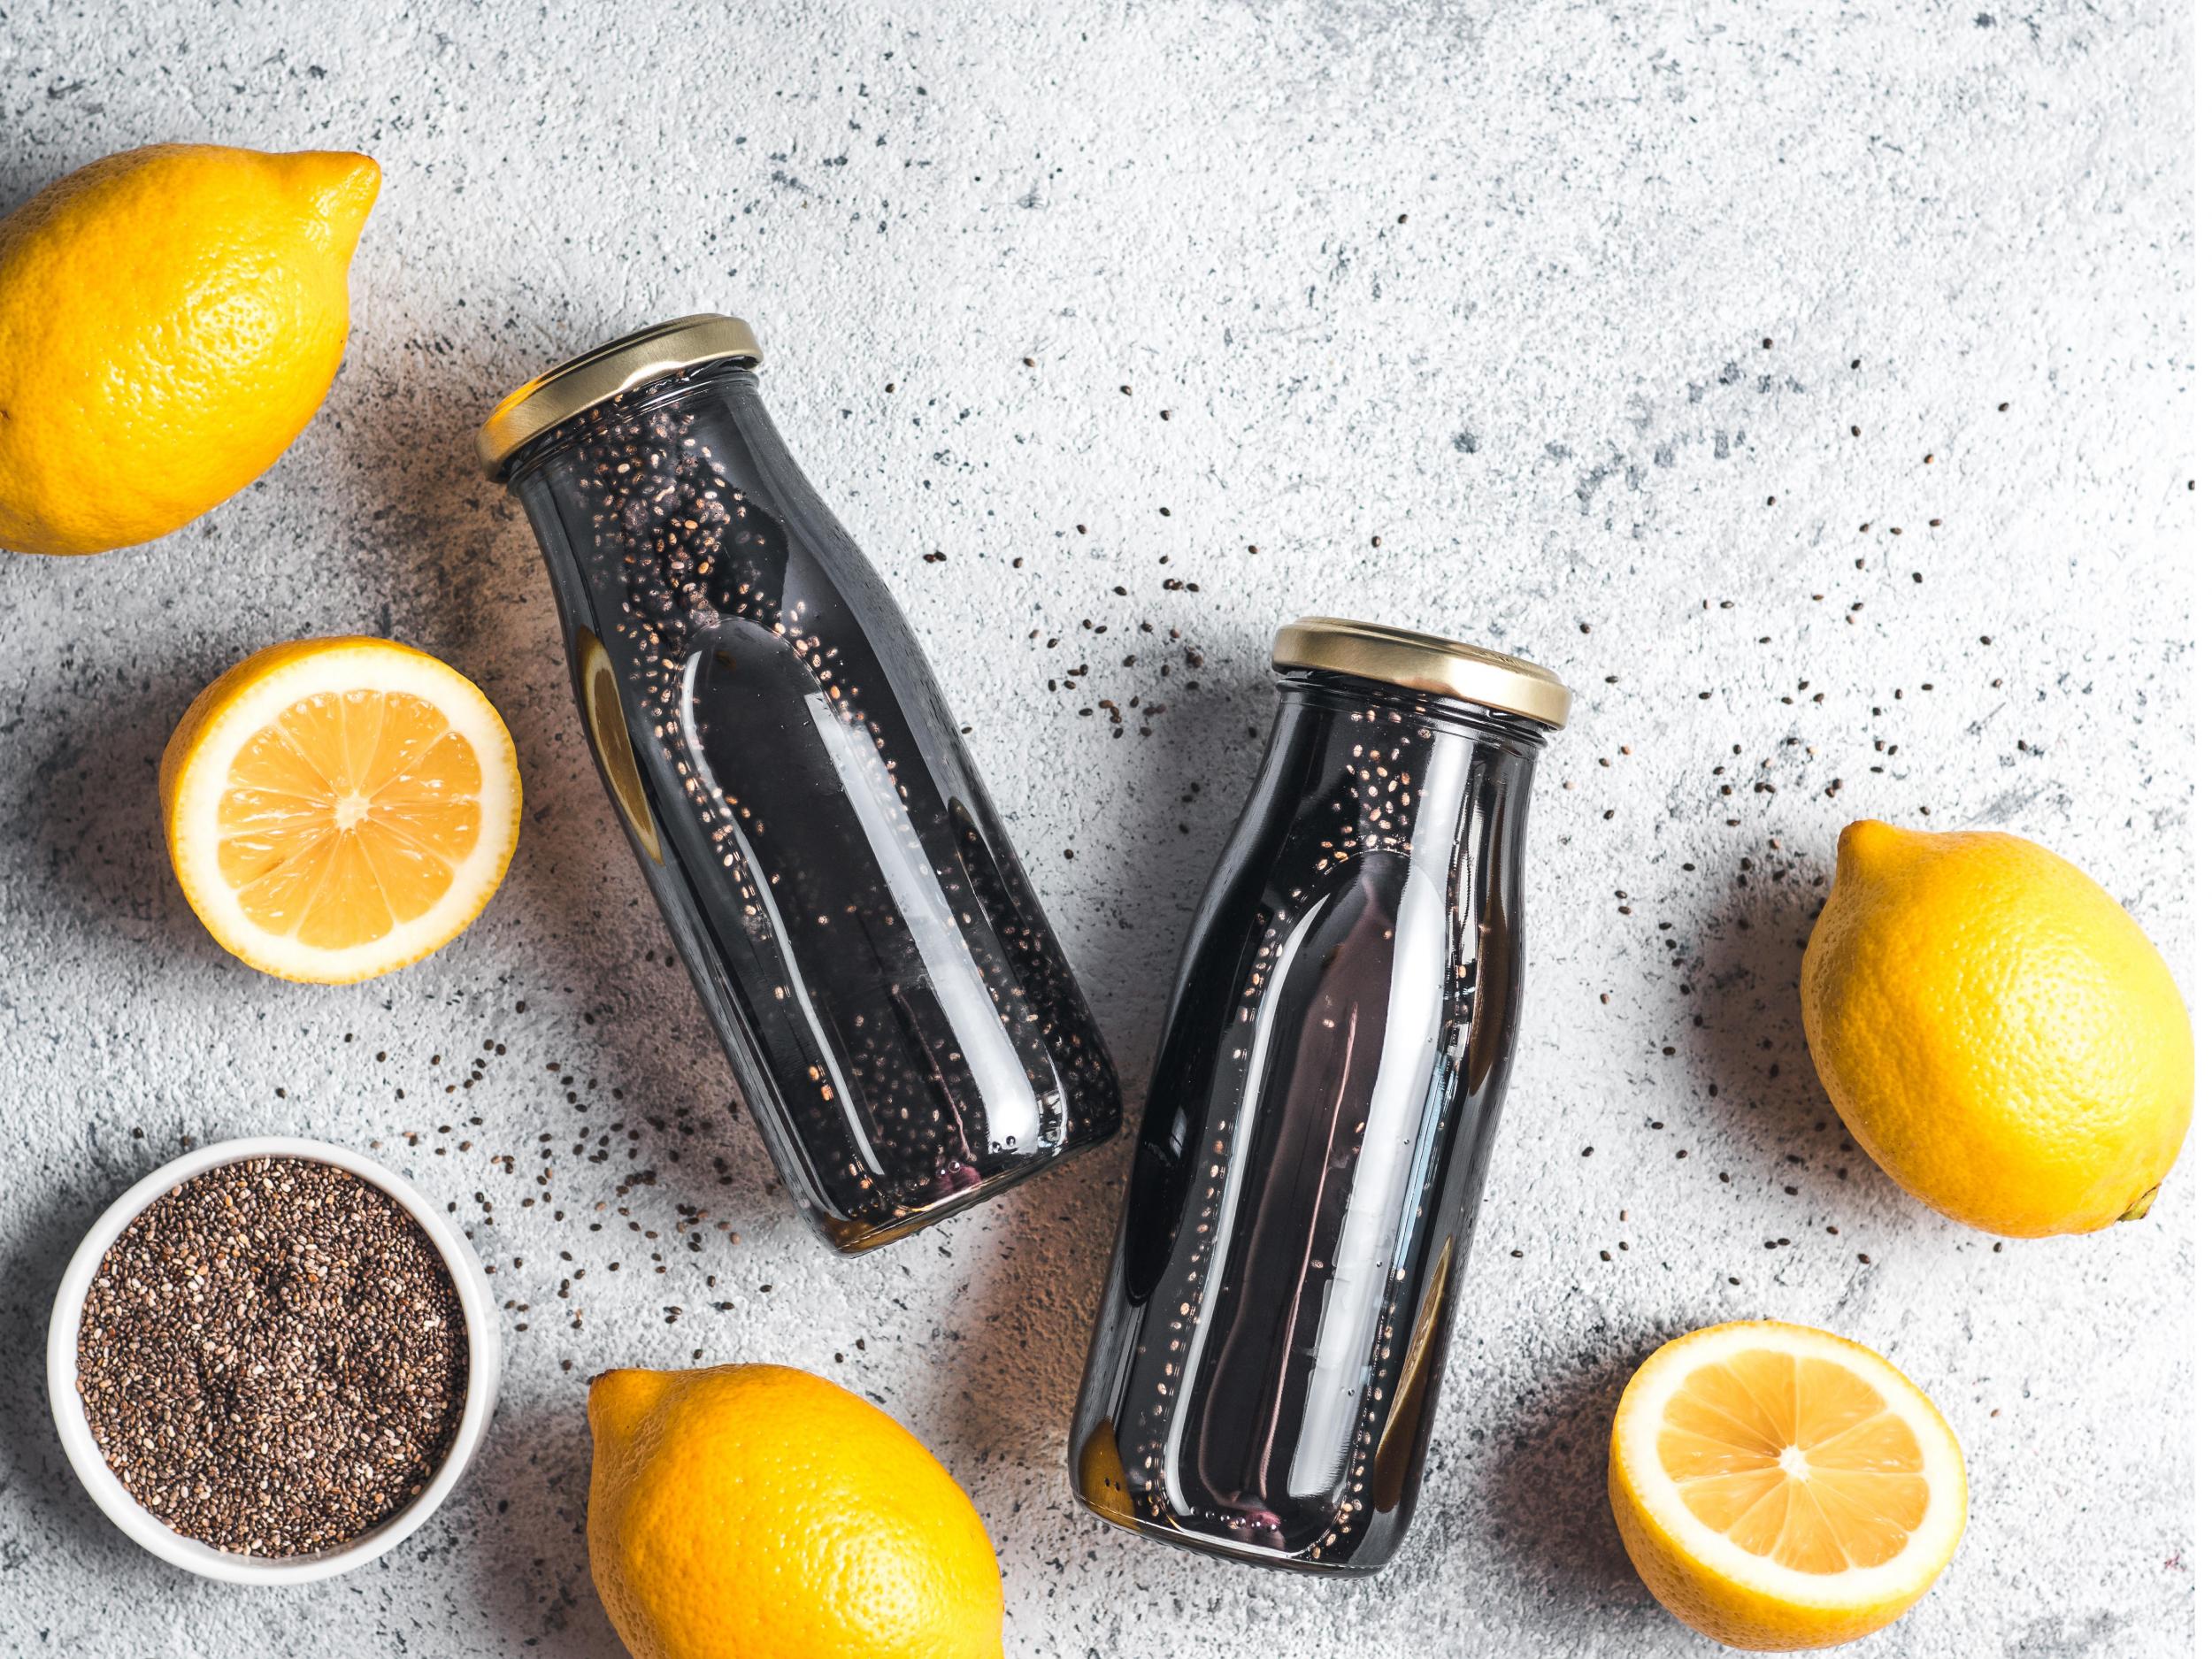 Activated charcoal can slow down your bowel